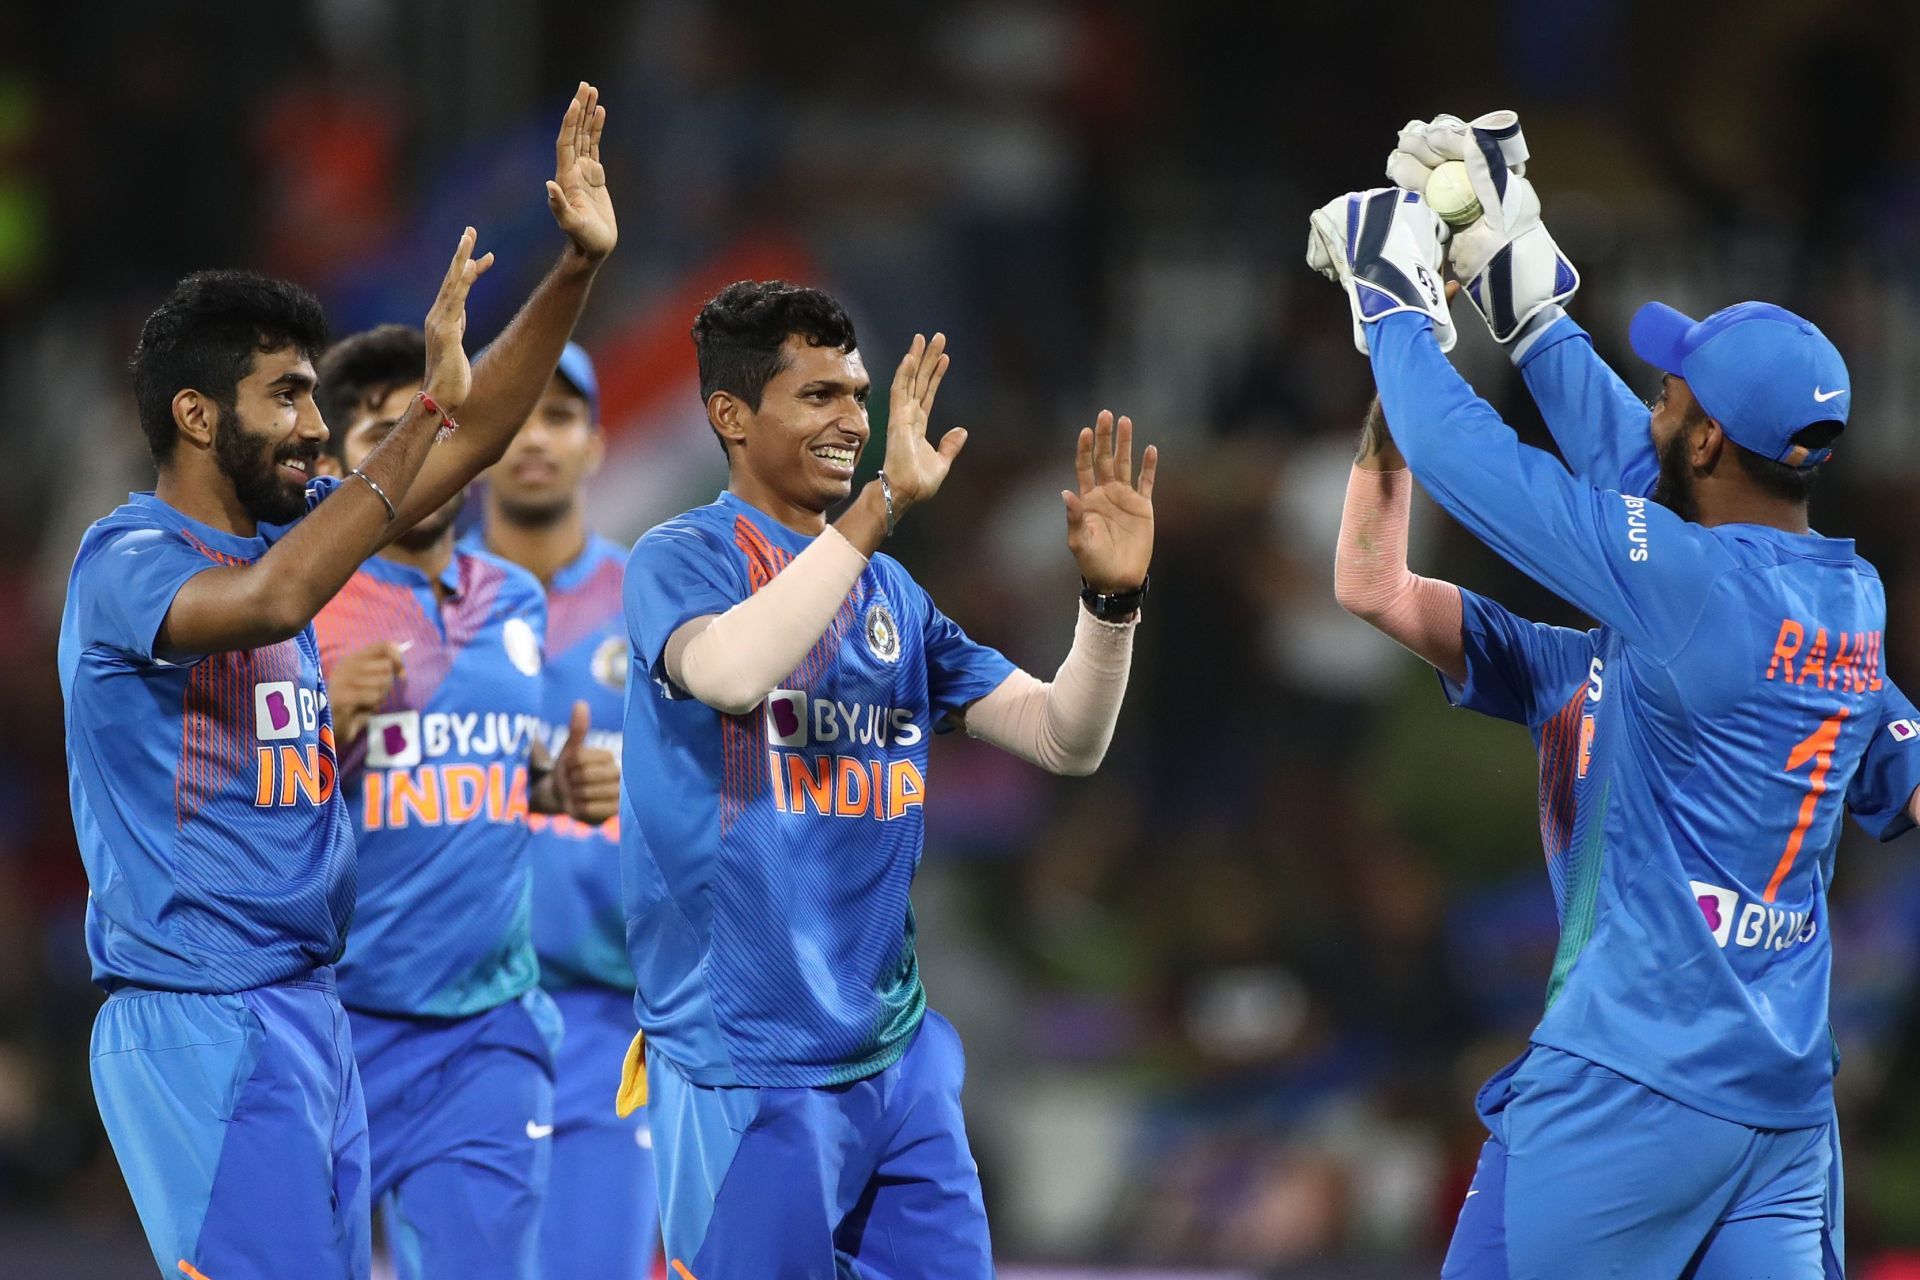 Navdeep Saini celebrates a wicket with teammates. Pic: Getty Images